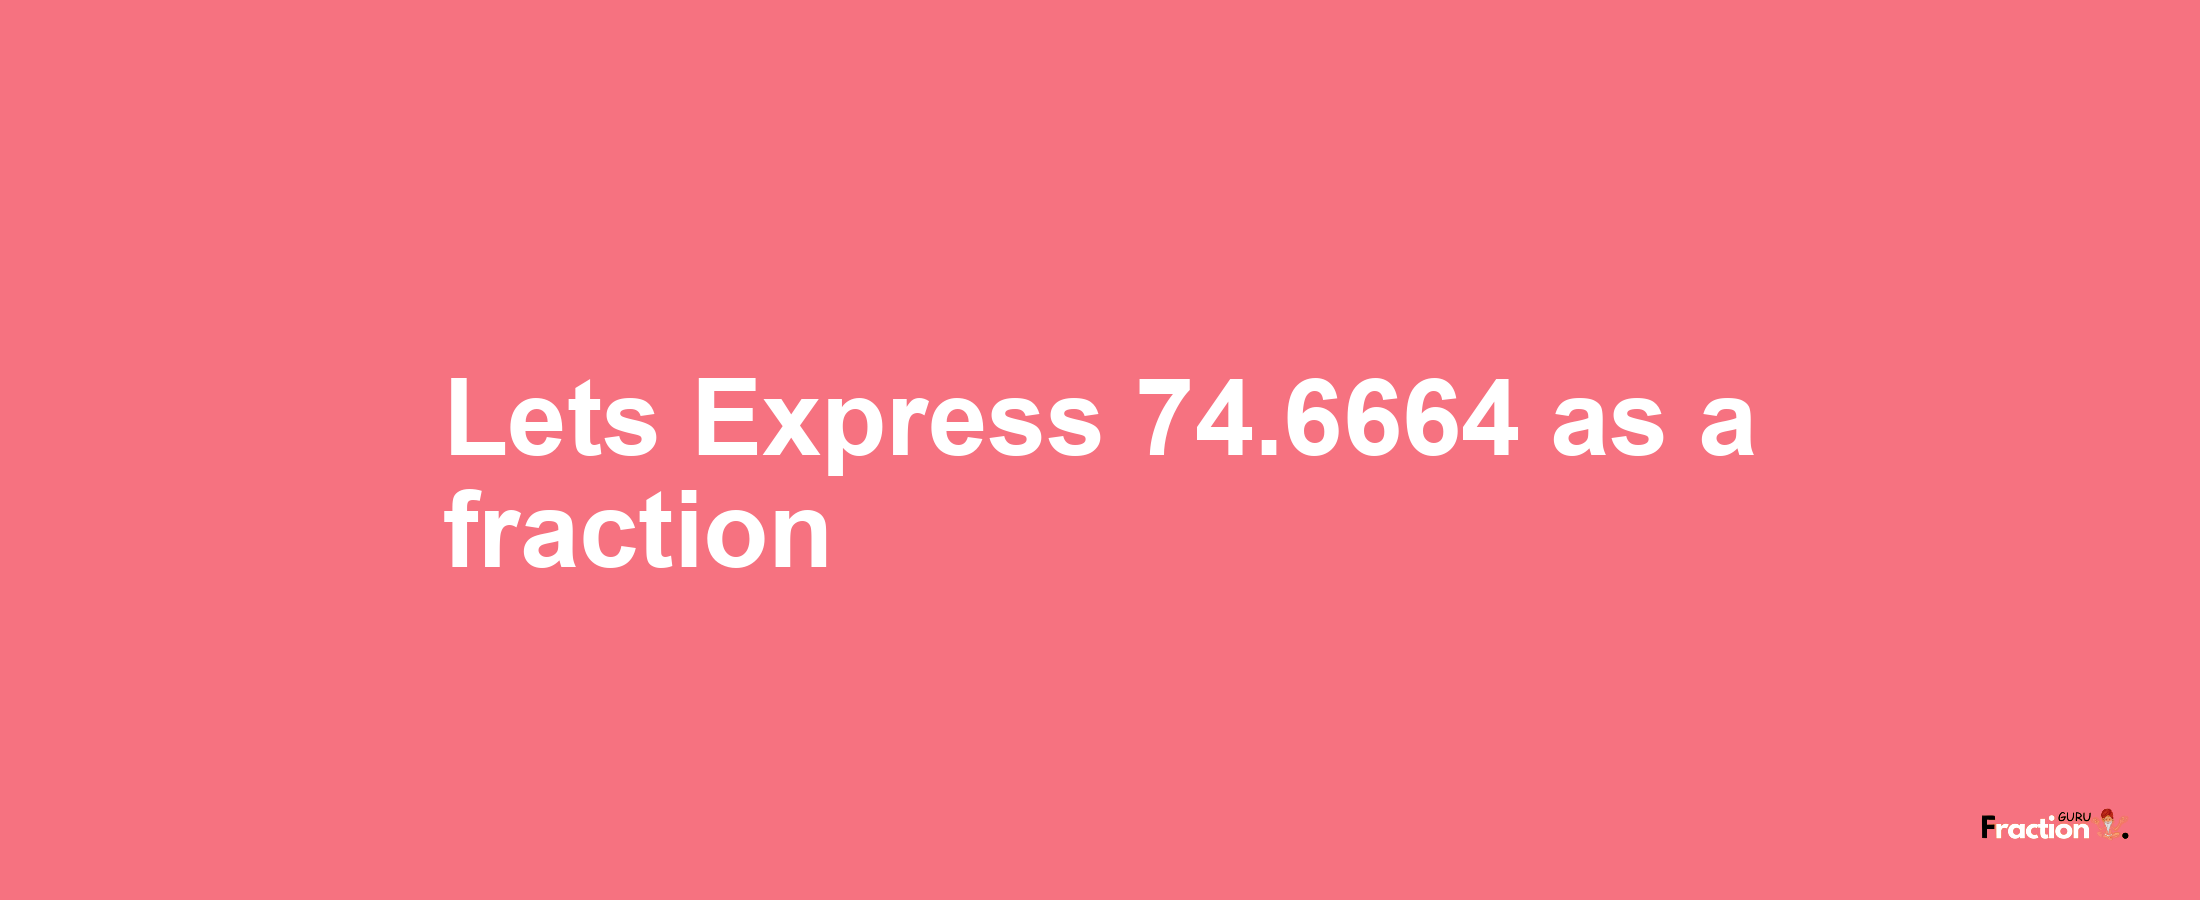 Lets Express 74.6664 as afraction